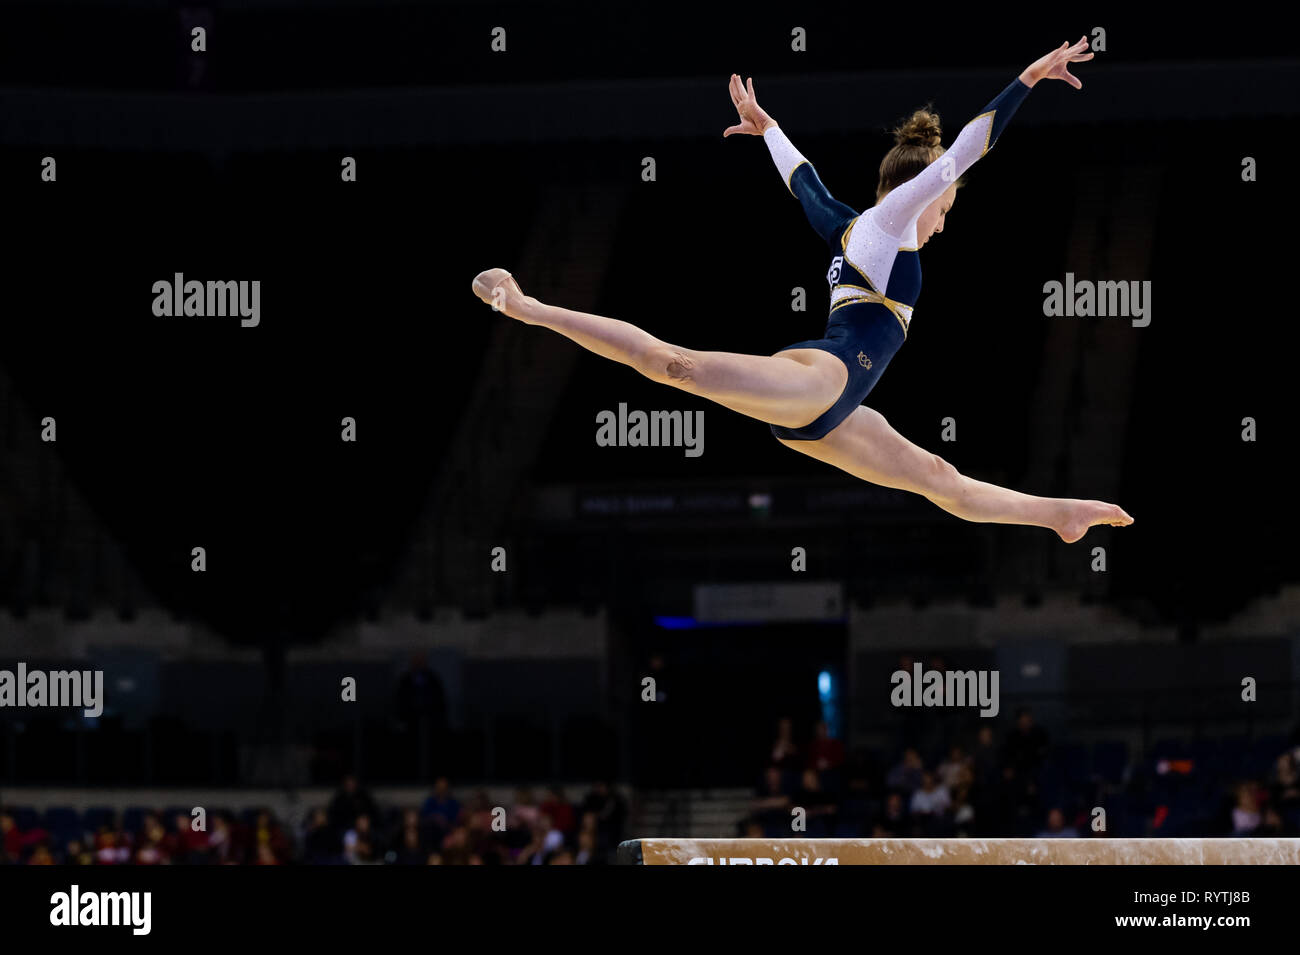 Liverpool, UK. 15th Mar, 2019. Rosie Bayliss of Greenwich Royals competing during the beam rotation at the Men's and Women's Artistic British Championships 2019, M&S Bank Arena, Liverpool, UK. Credit: Iain Scott Photography/Alamy Live News Stock Photo